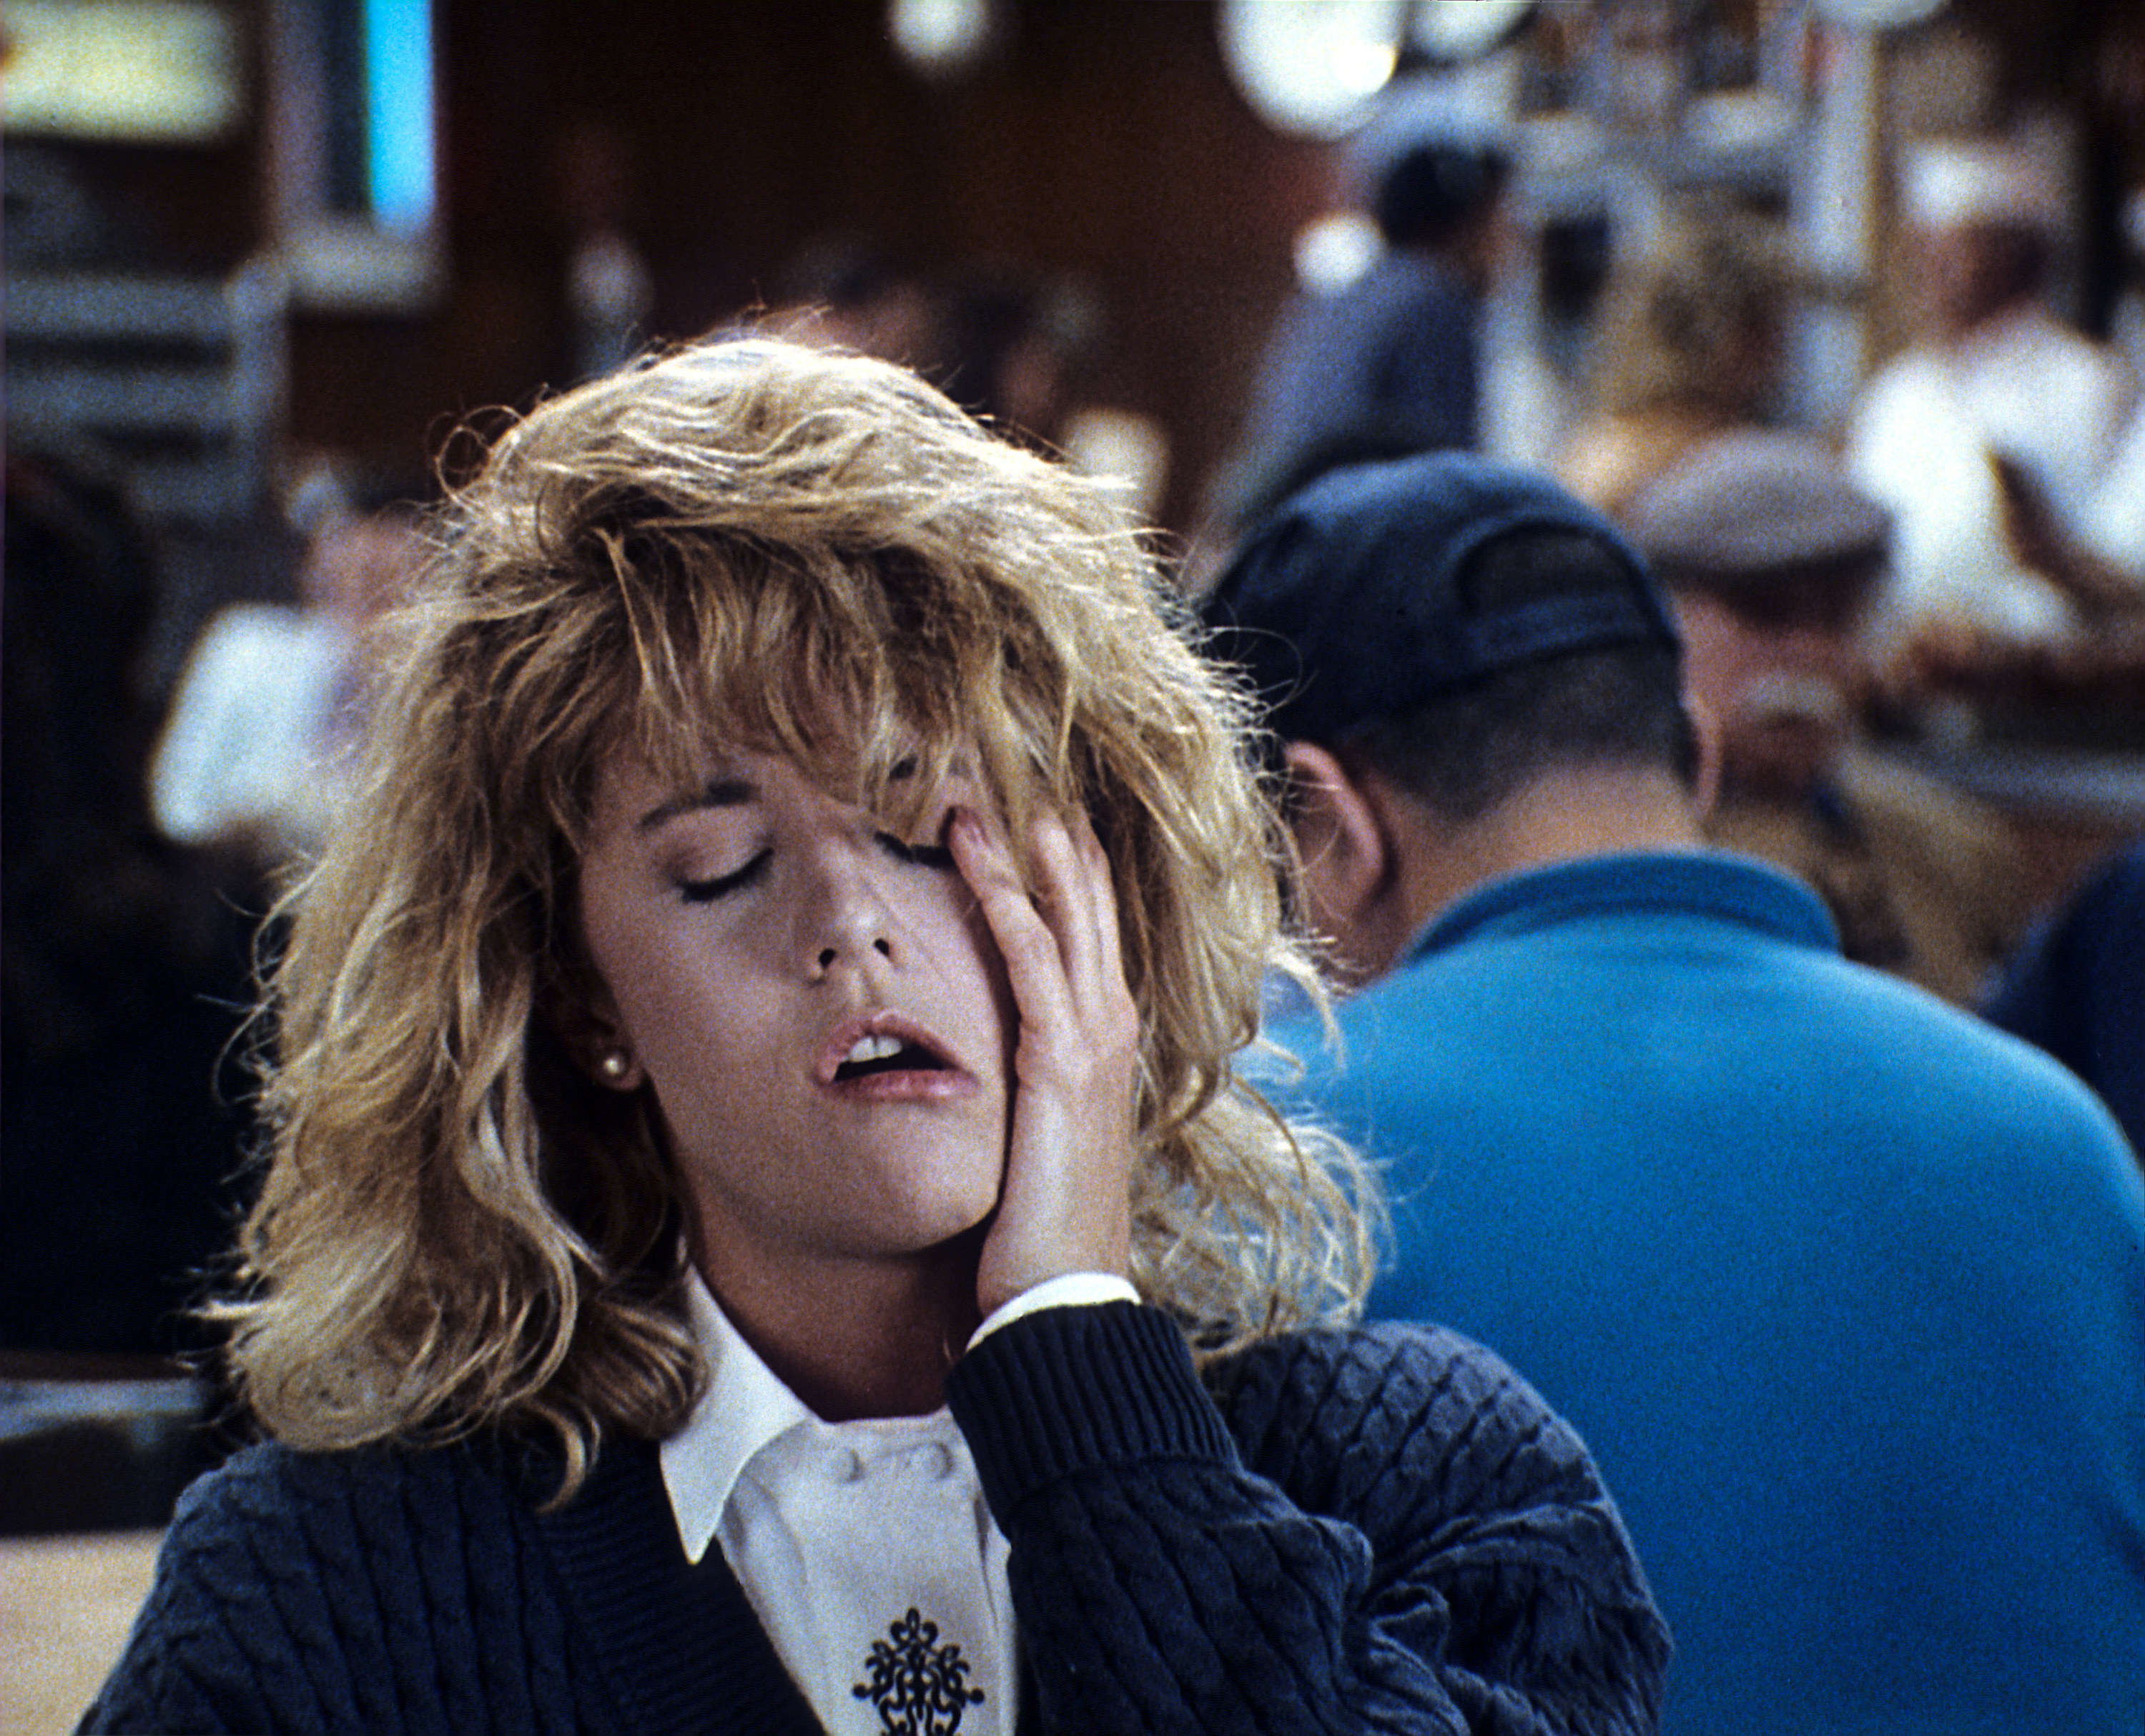 Sally faking an orgasm in &quot;When Harry Met Sally&quot;